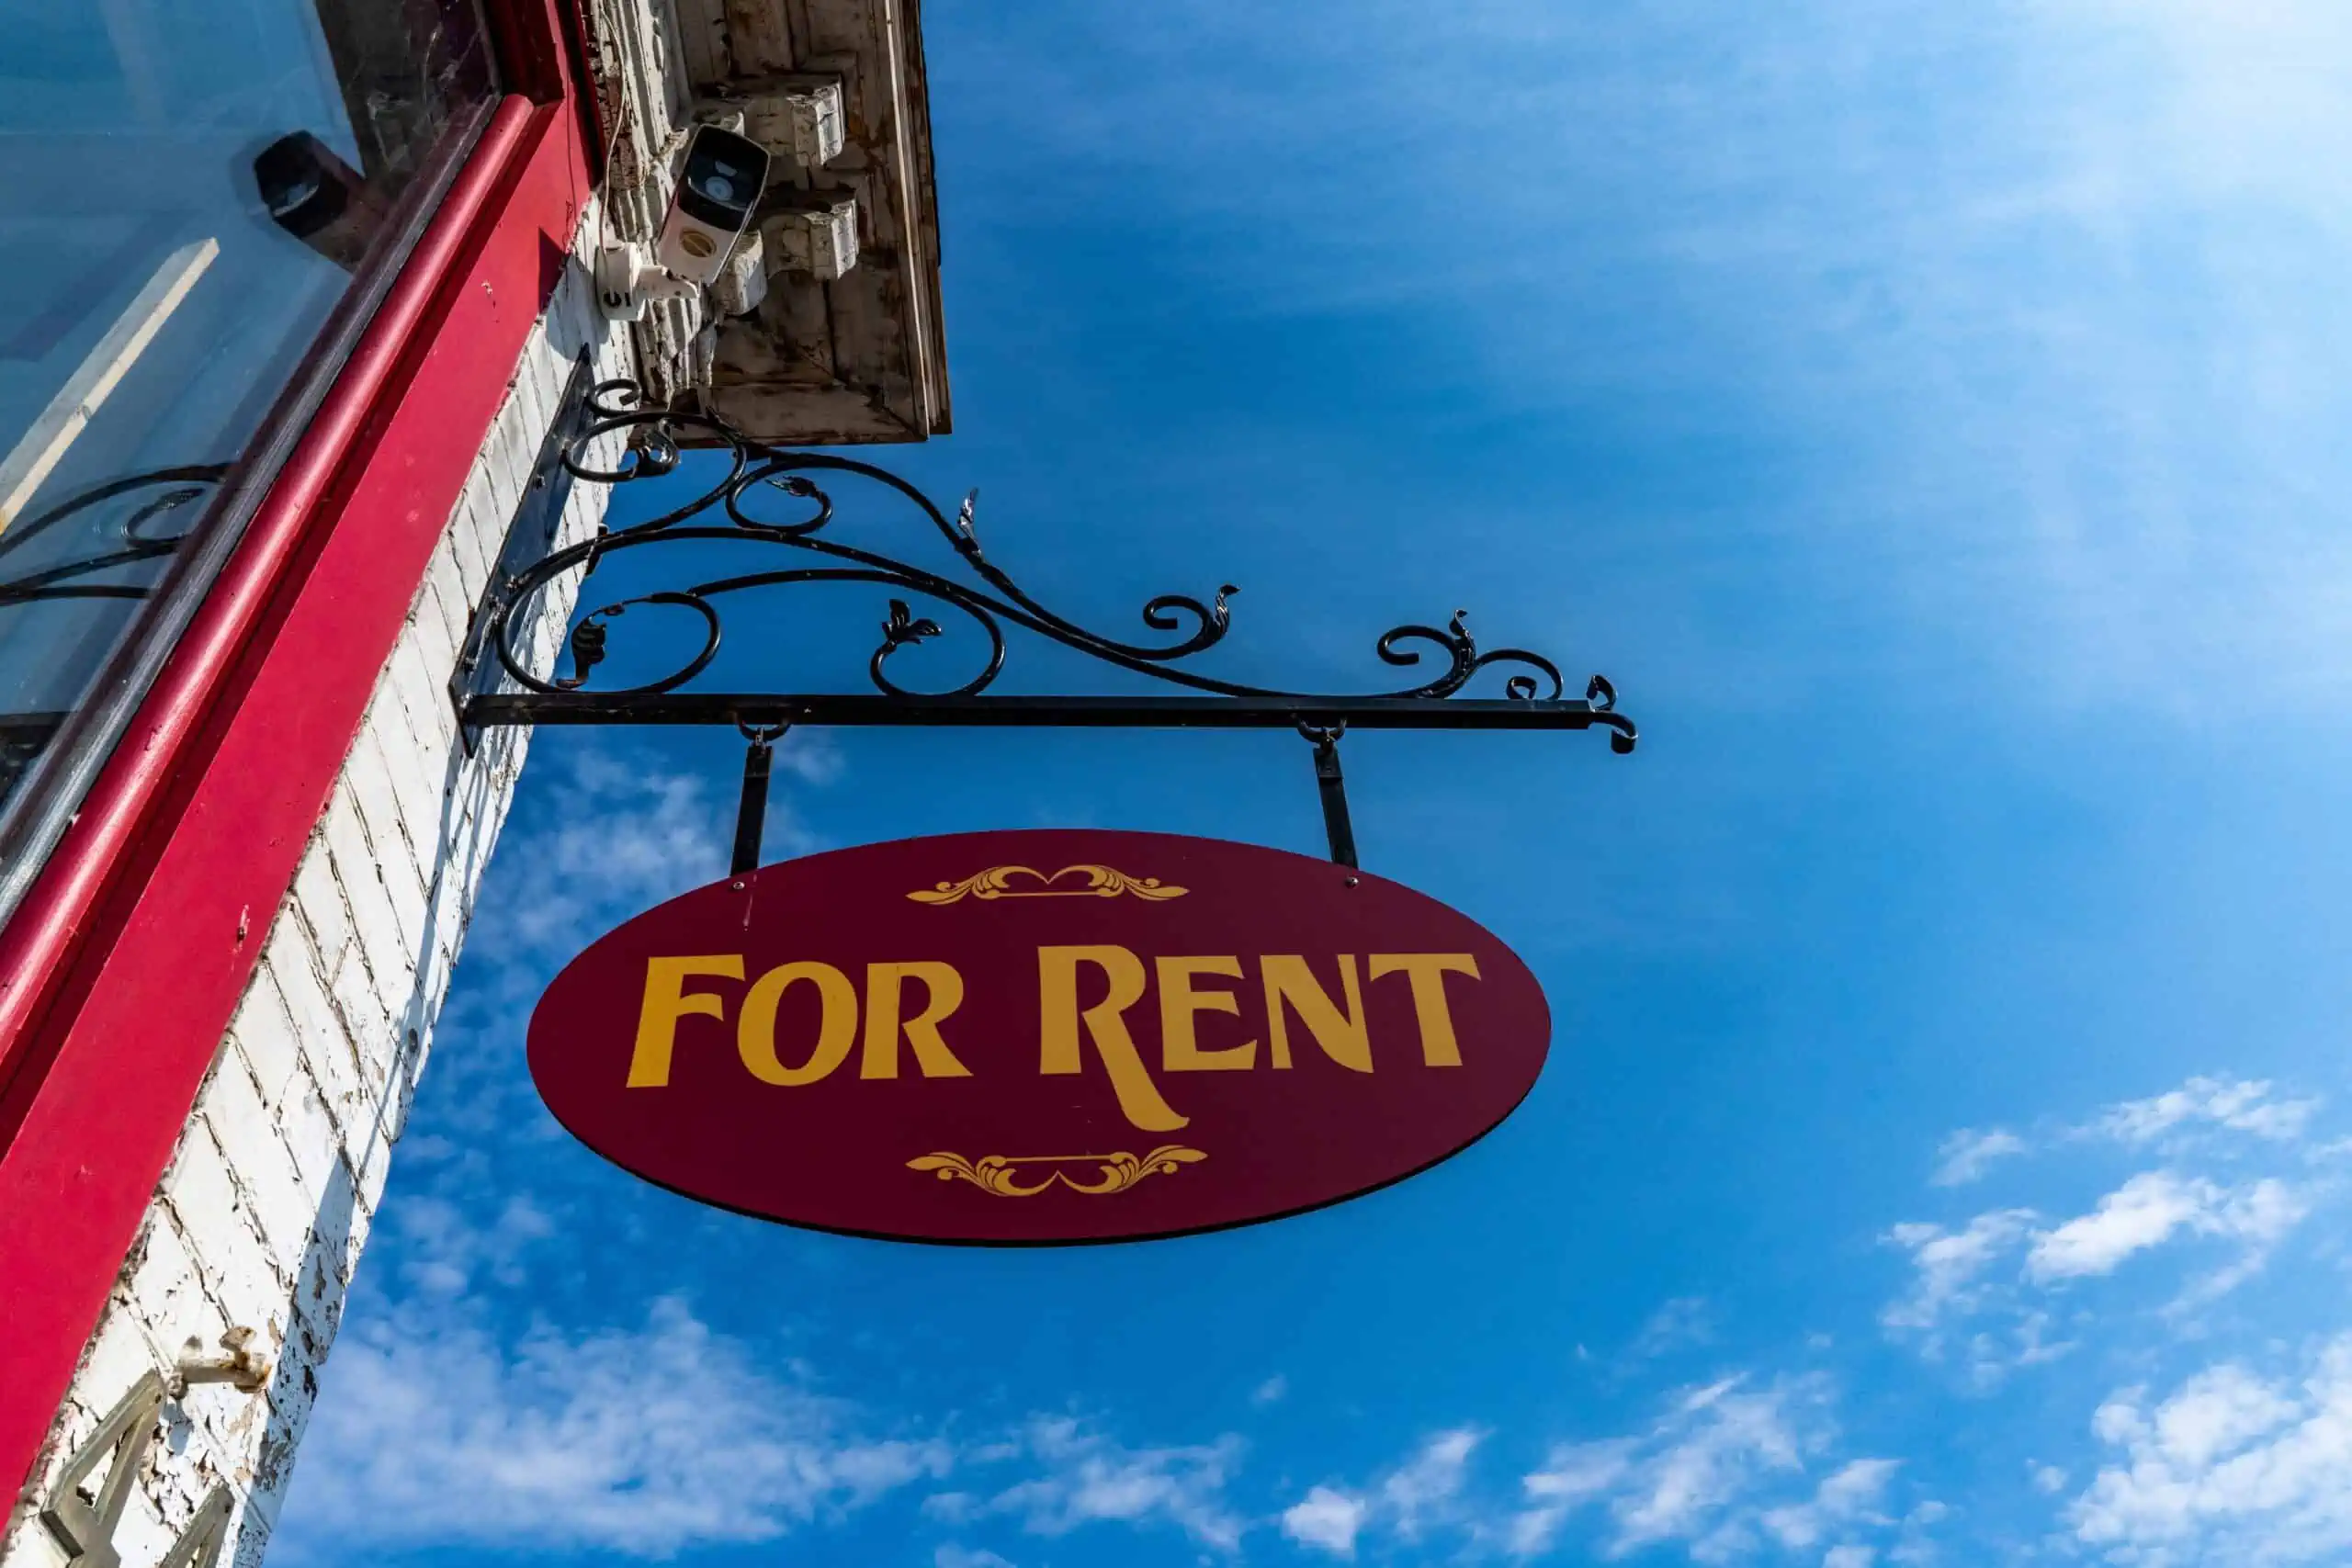 For rent sign representing the arrangement considered in Walsh v Yang